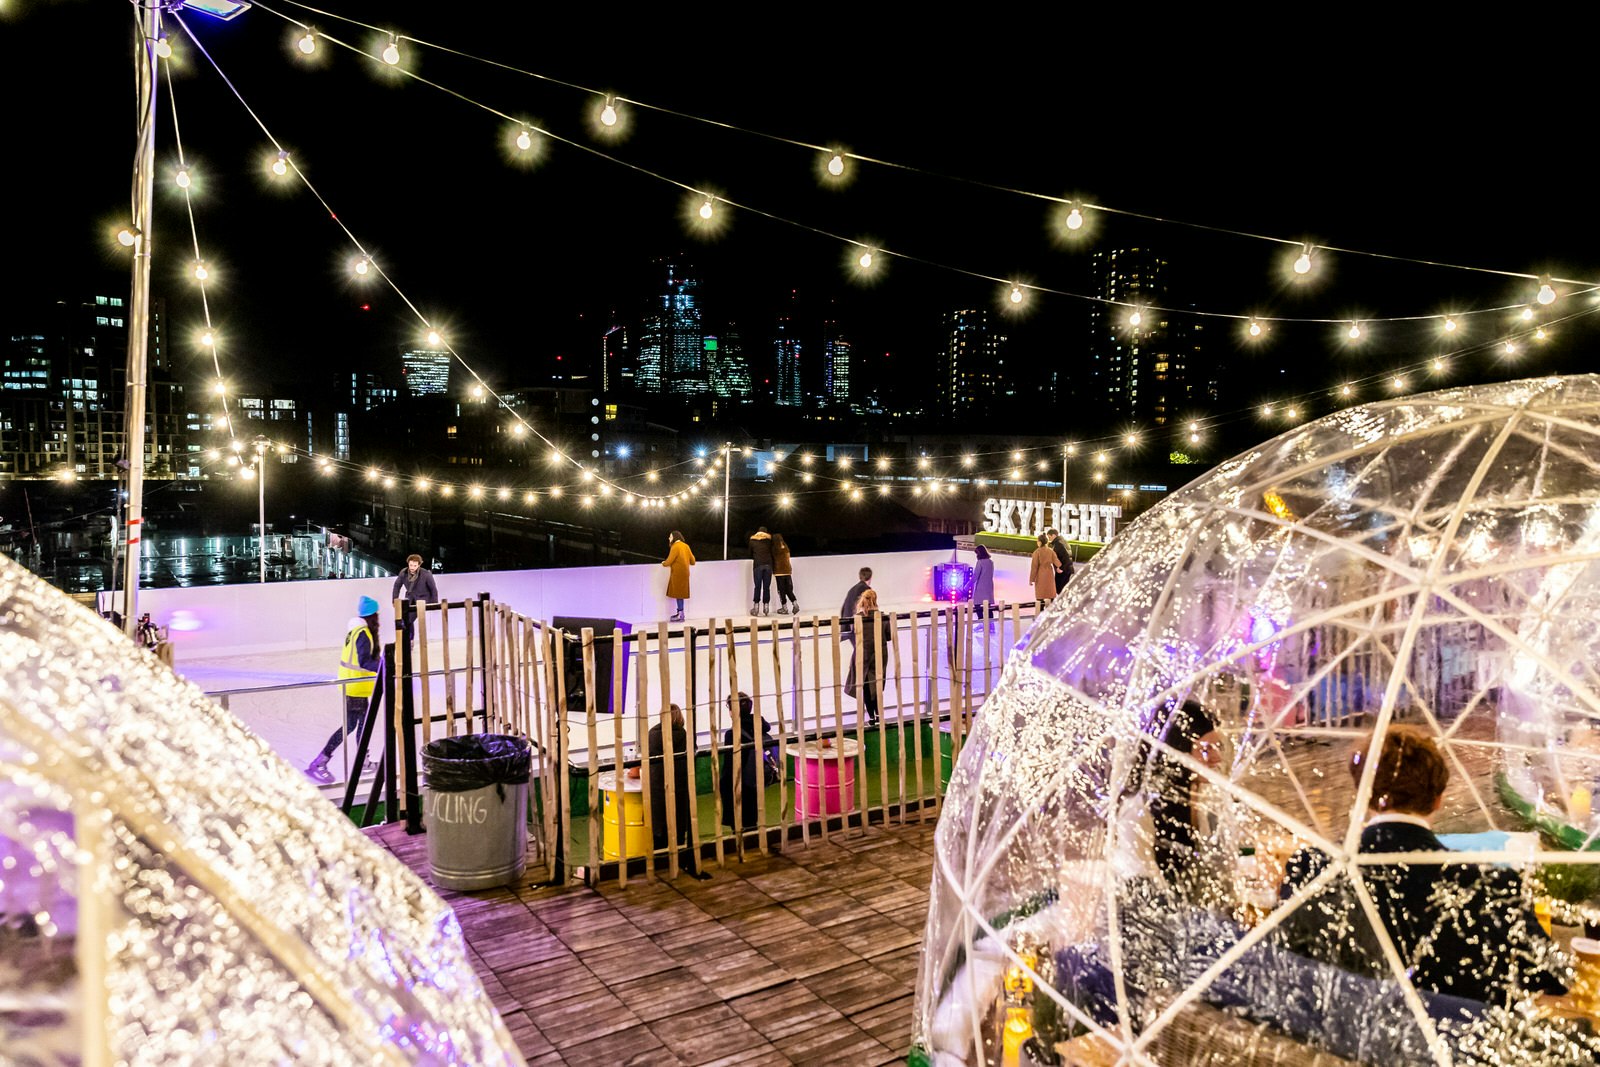 Image taken at night time of the ice rink at Skylight rooftop bar, London. In the distance we can see the lights of many London skyscrapers while a few people skate on the white rink. In the foreground, out of focus, there are plastic igloos full of people drinking and chatting.